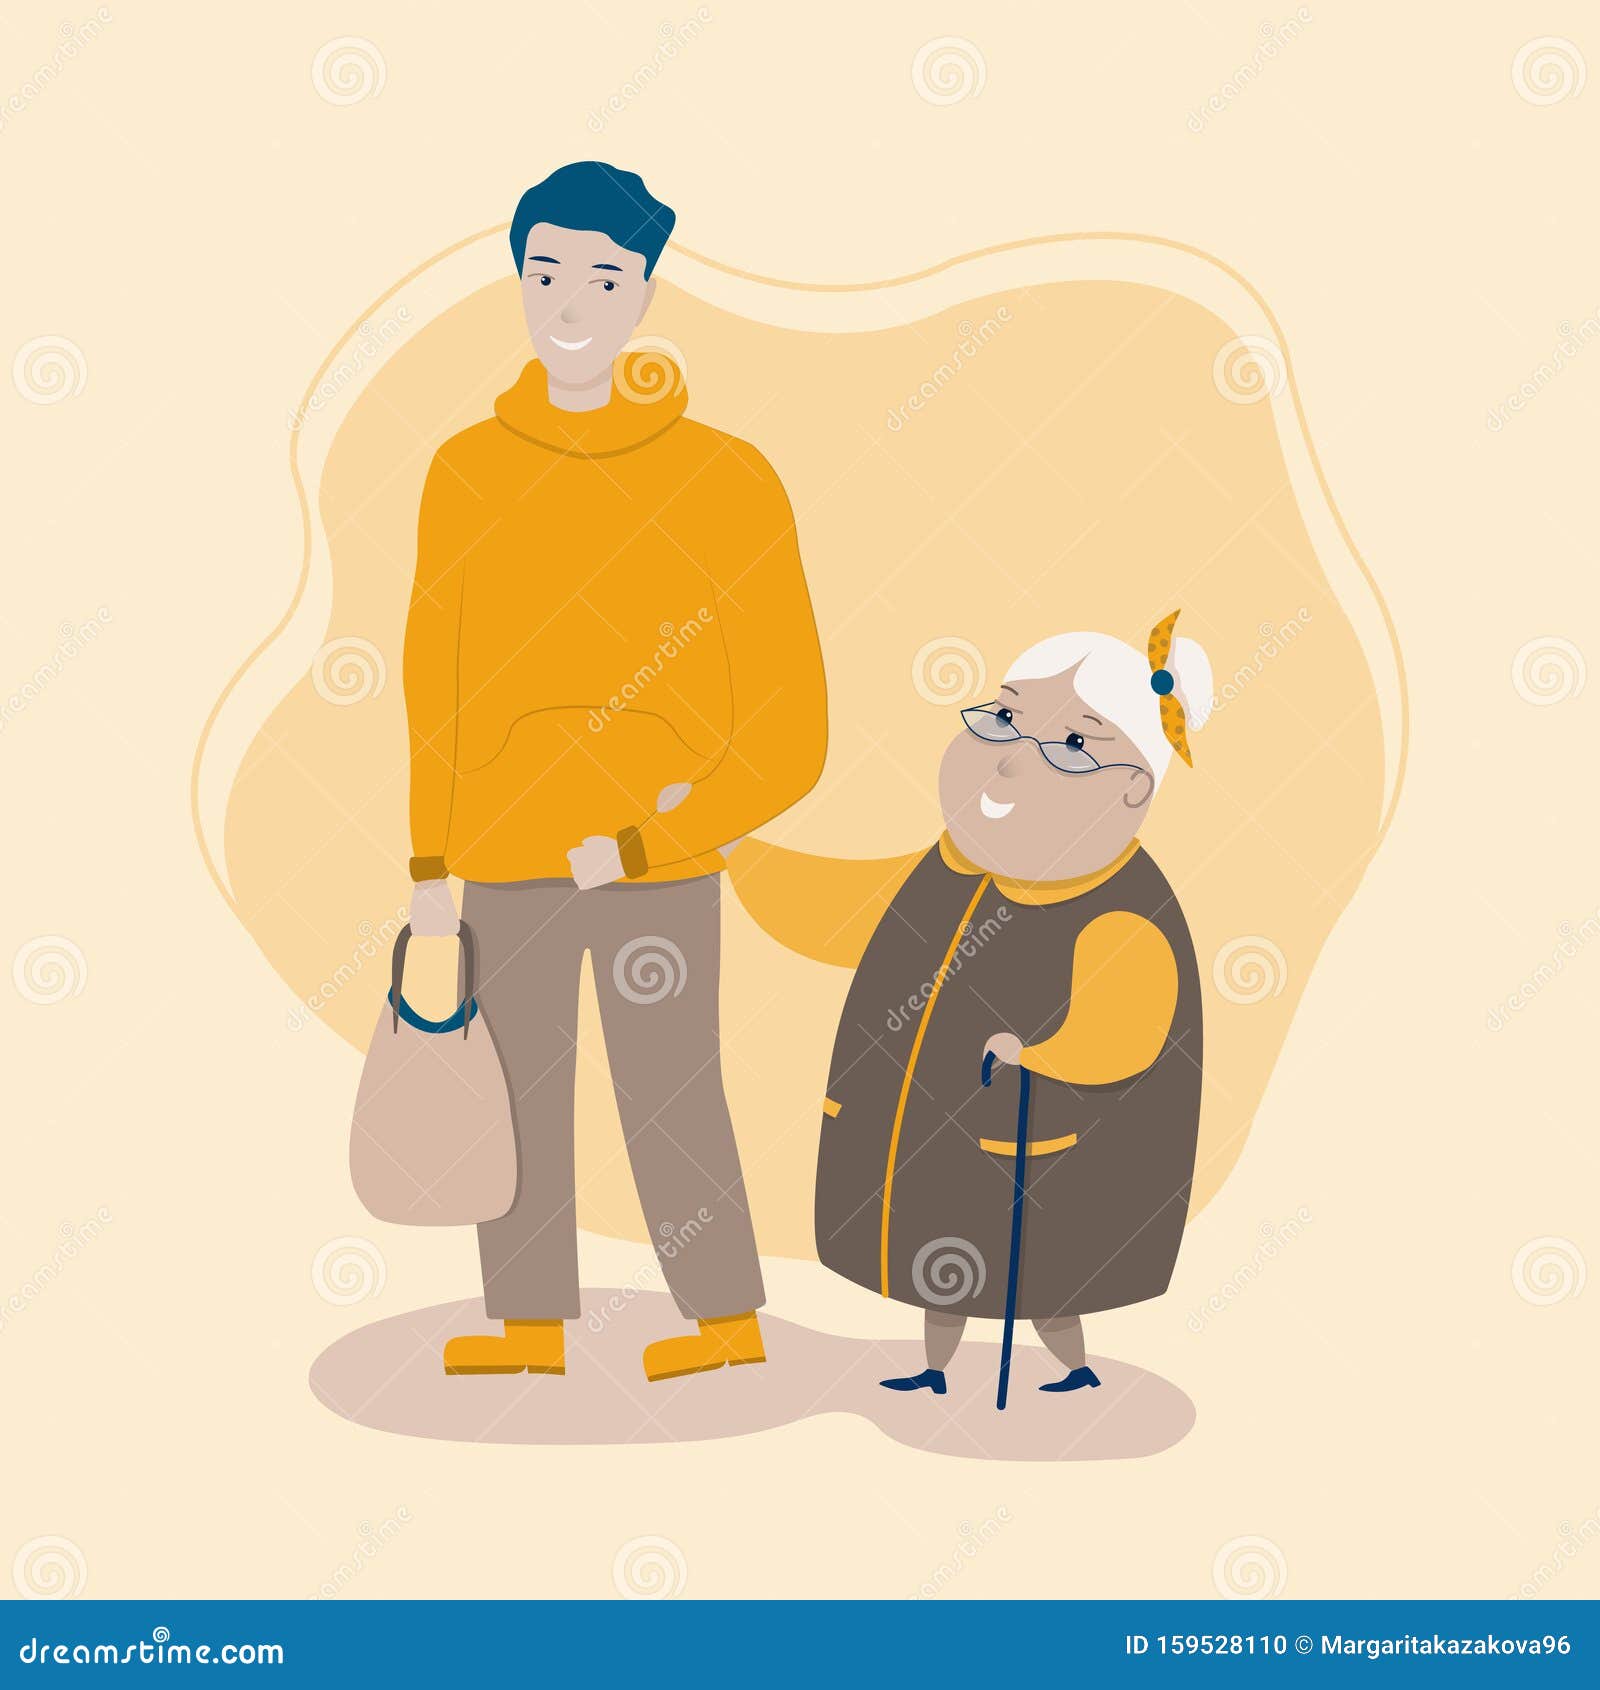 Creative Flat Design. Young Volunteer Man Caring for Elderly Woman ...